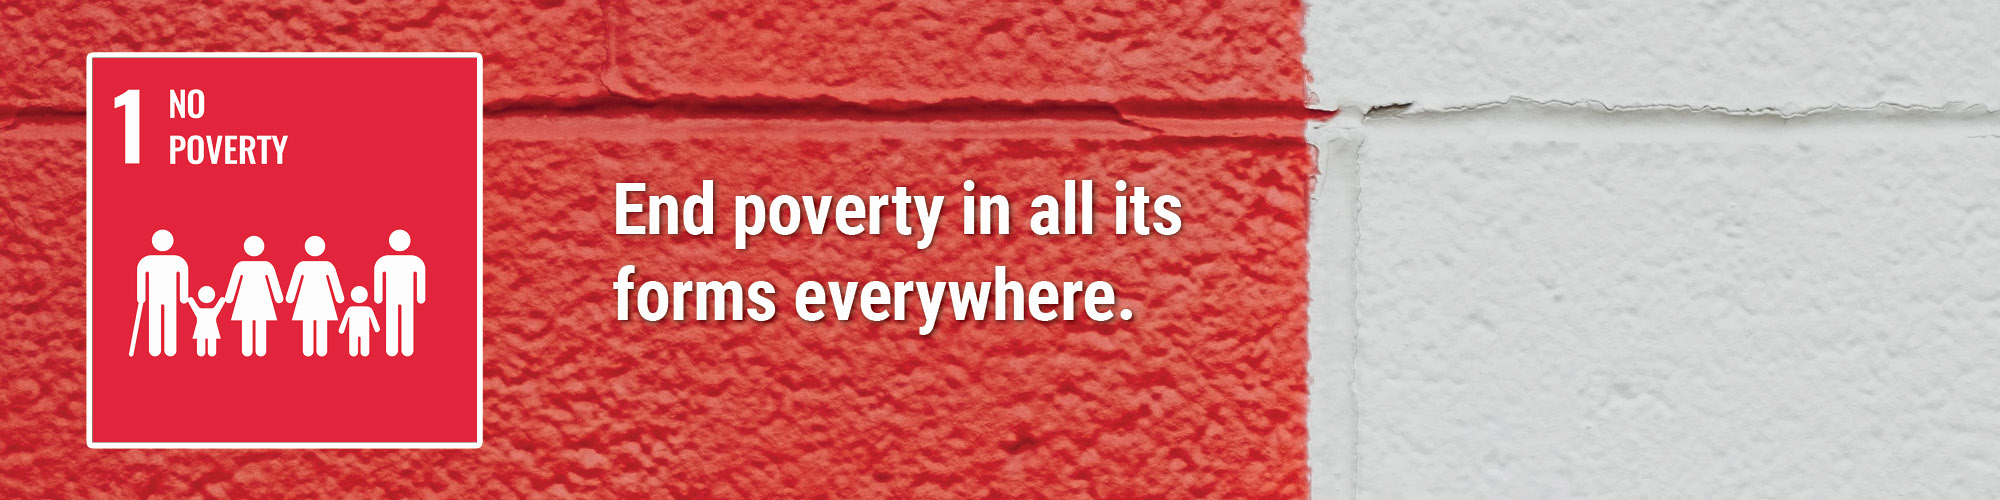 End poverty in all its forms everywhere.